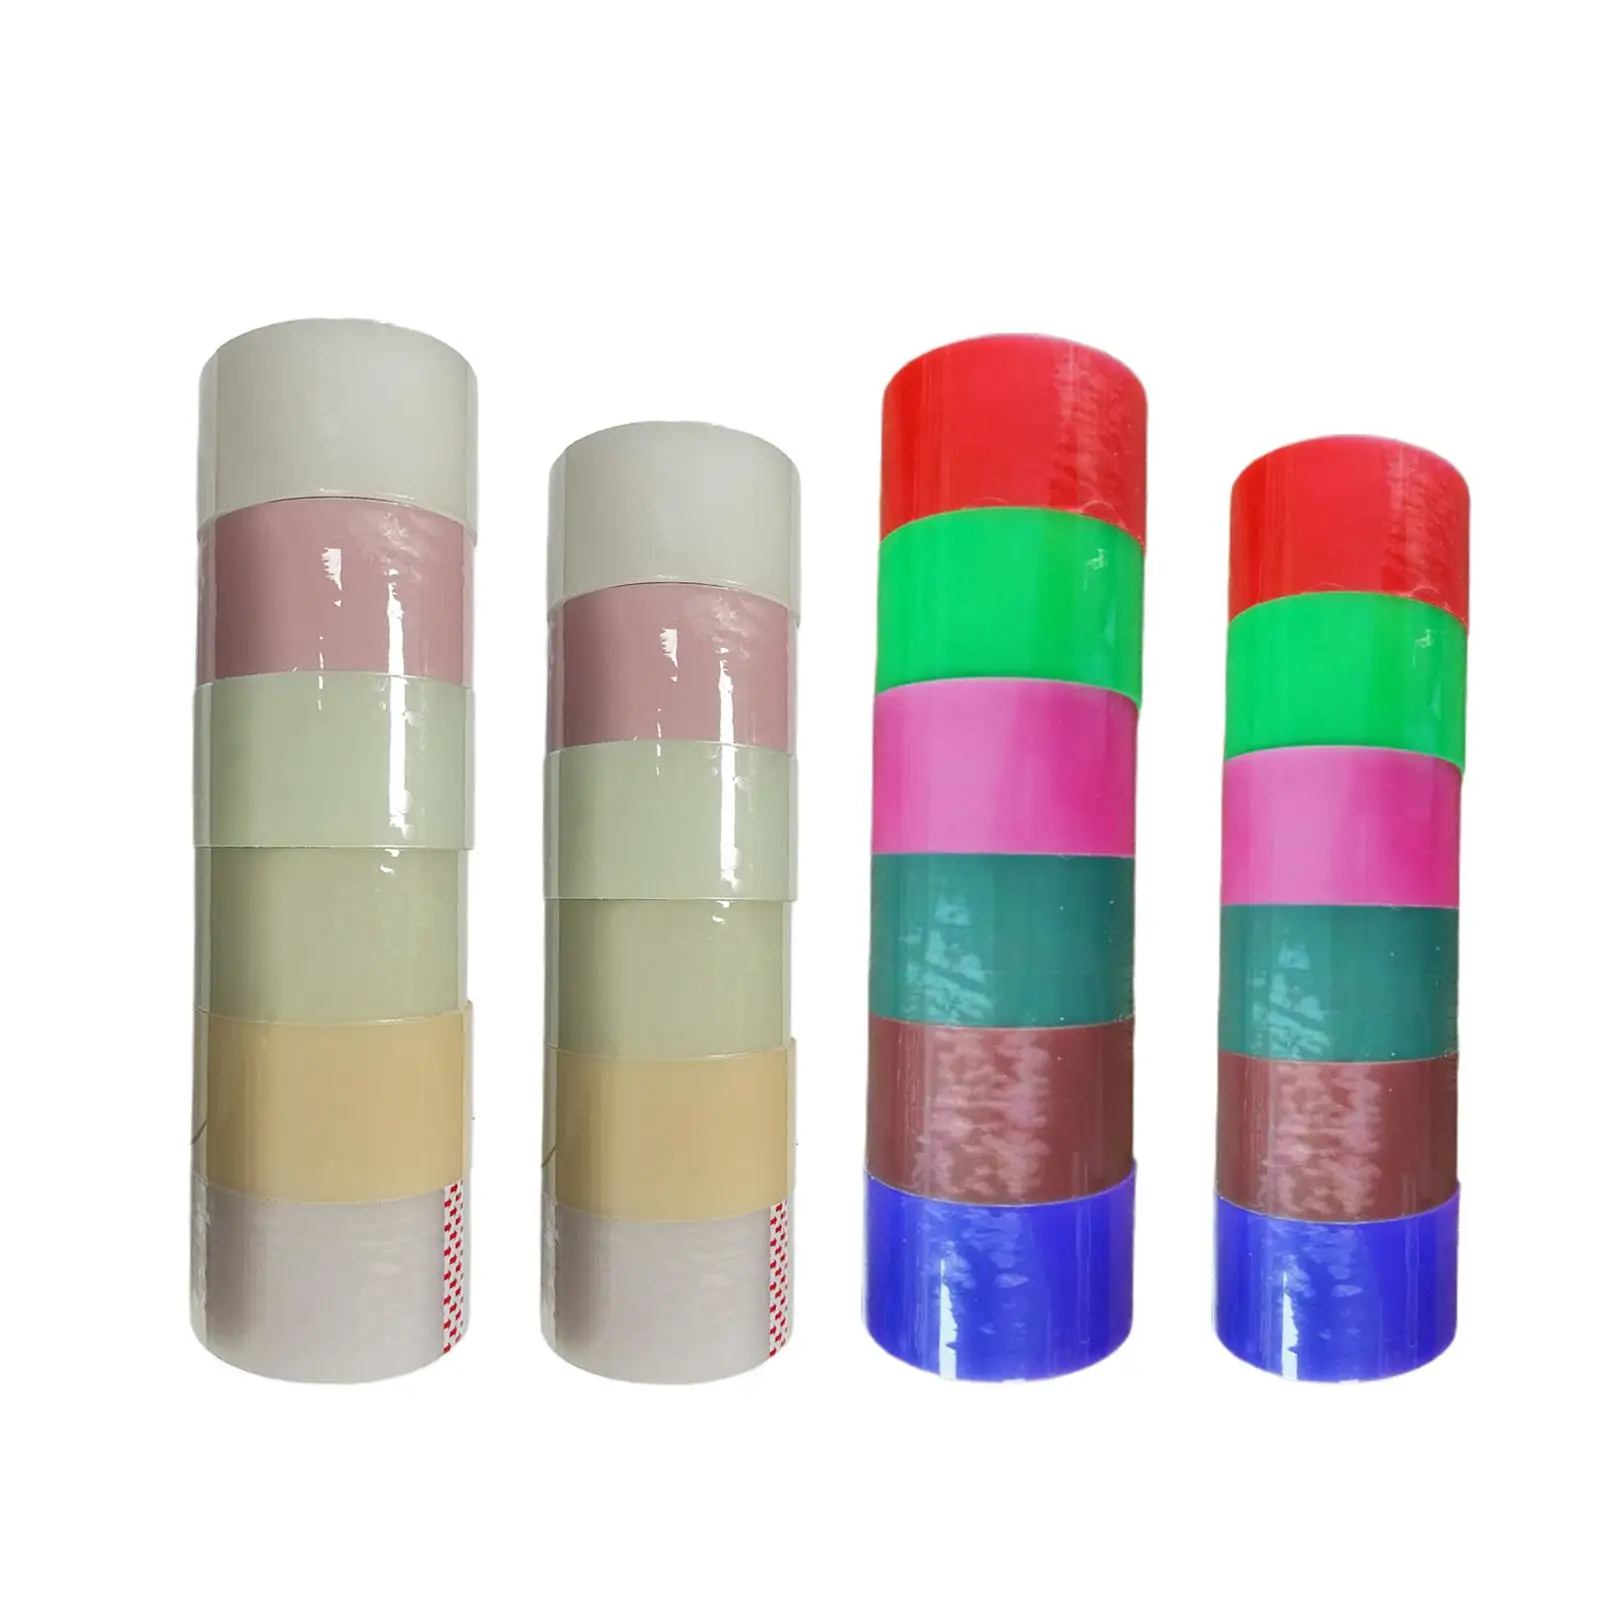 6x Sticky Ball Tape DIY Crafts Adhesive Funny Sticky Tape Funny Interesting Game Bubble Balloons Blowing for Adult Children Home